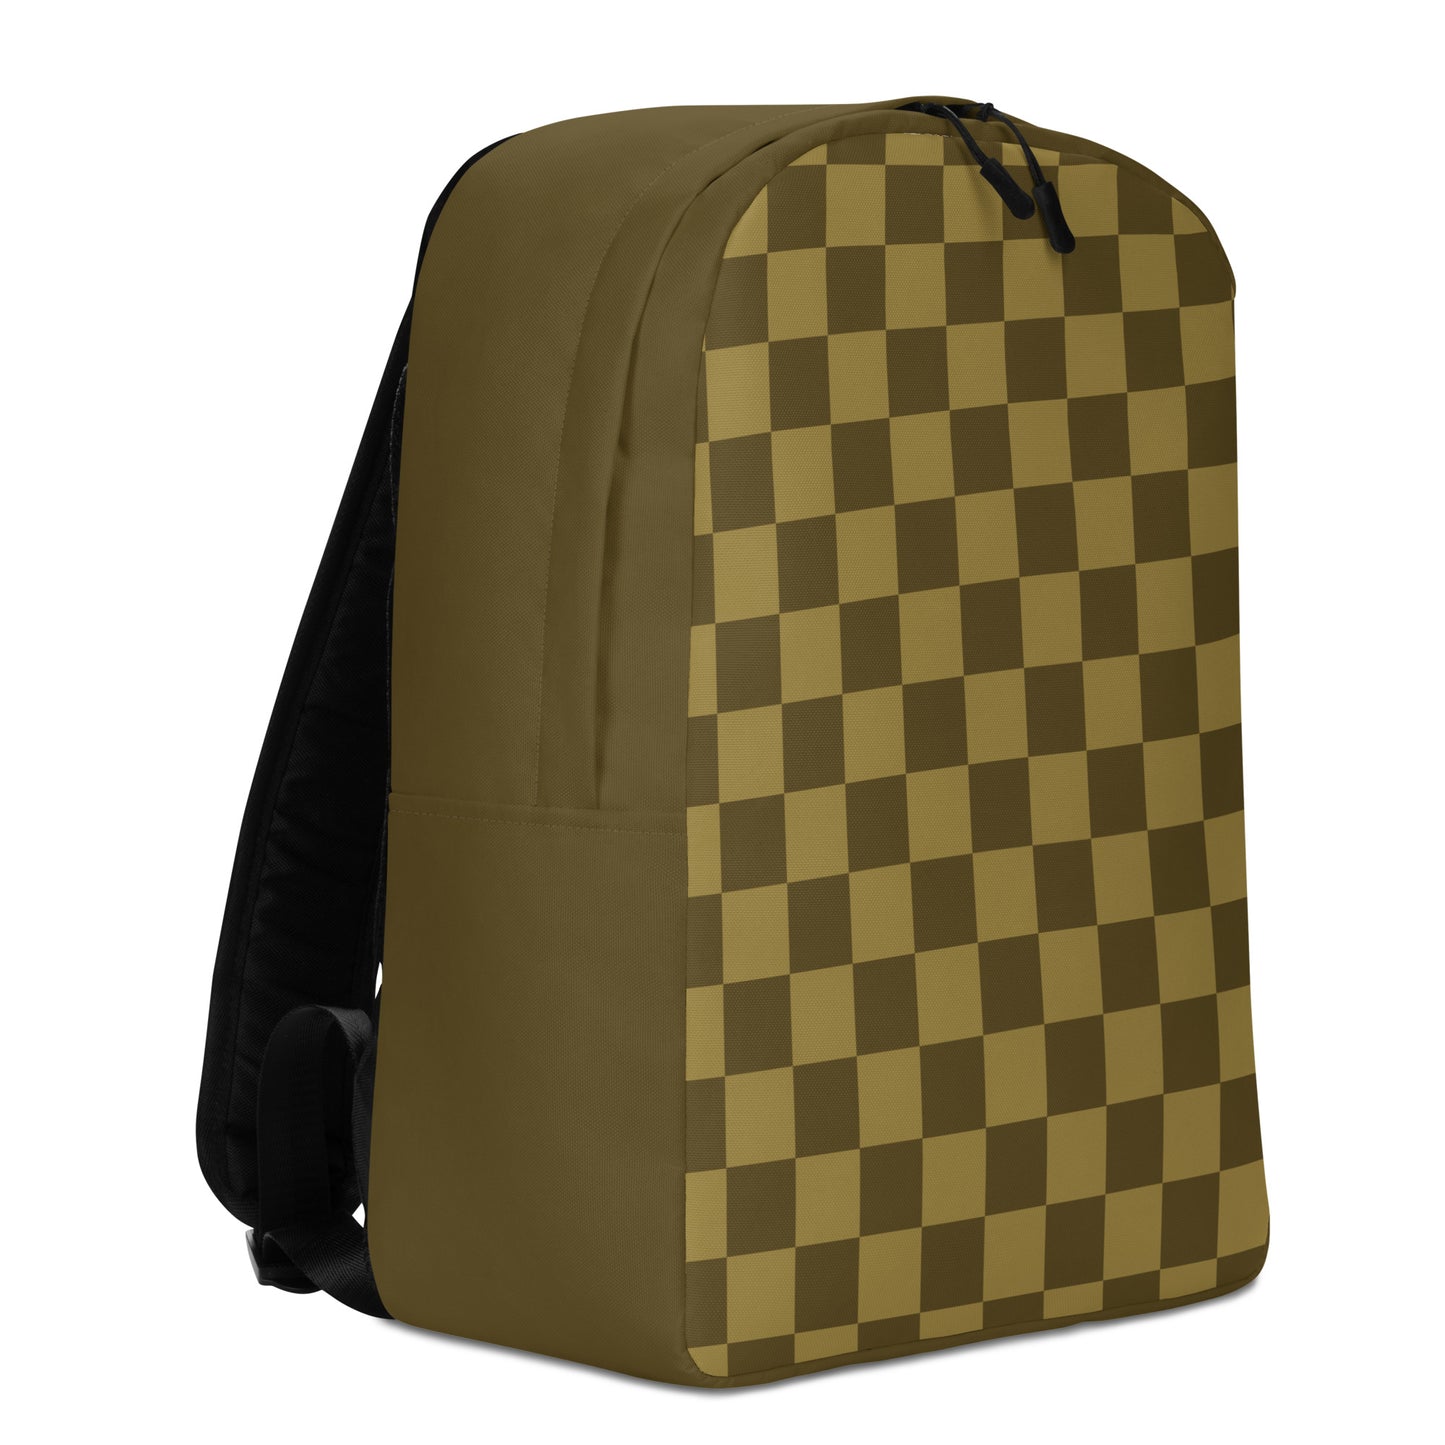 Wempy Dyocta Koto Signature Casual - Sustainably Made Backpack